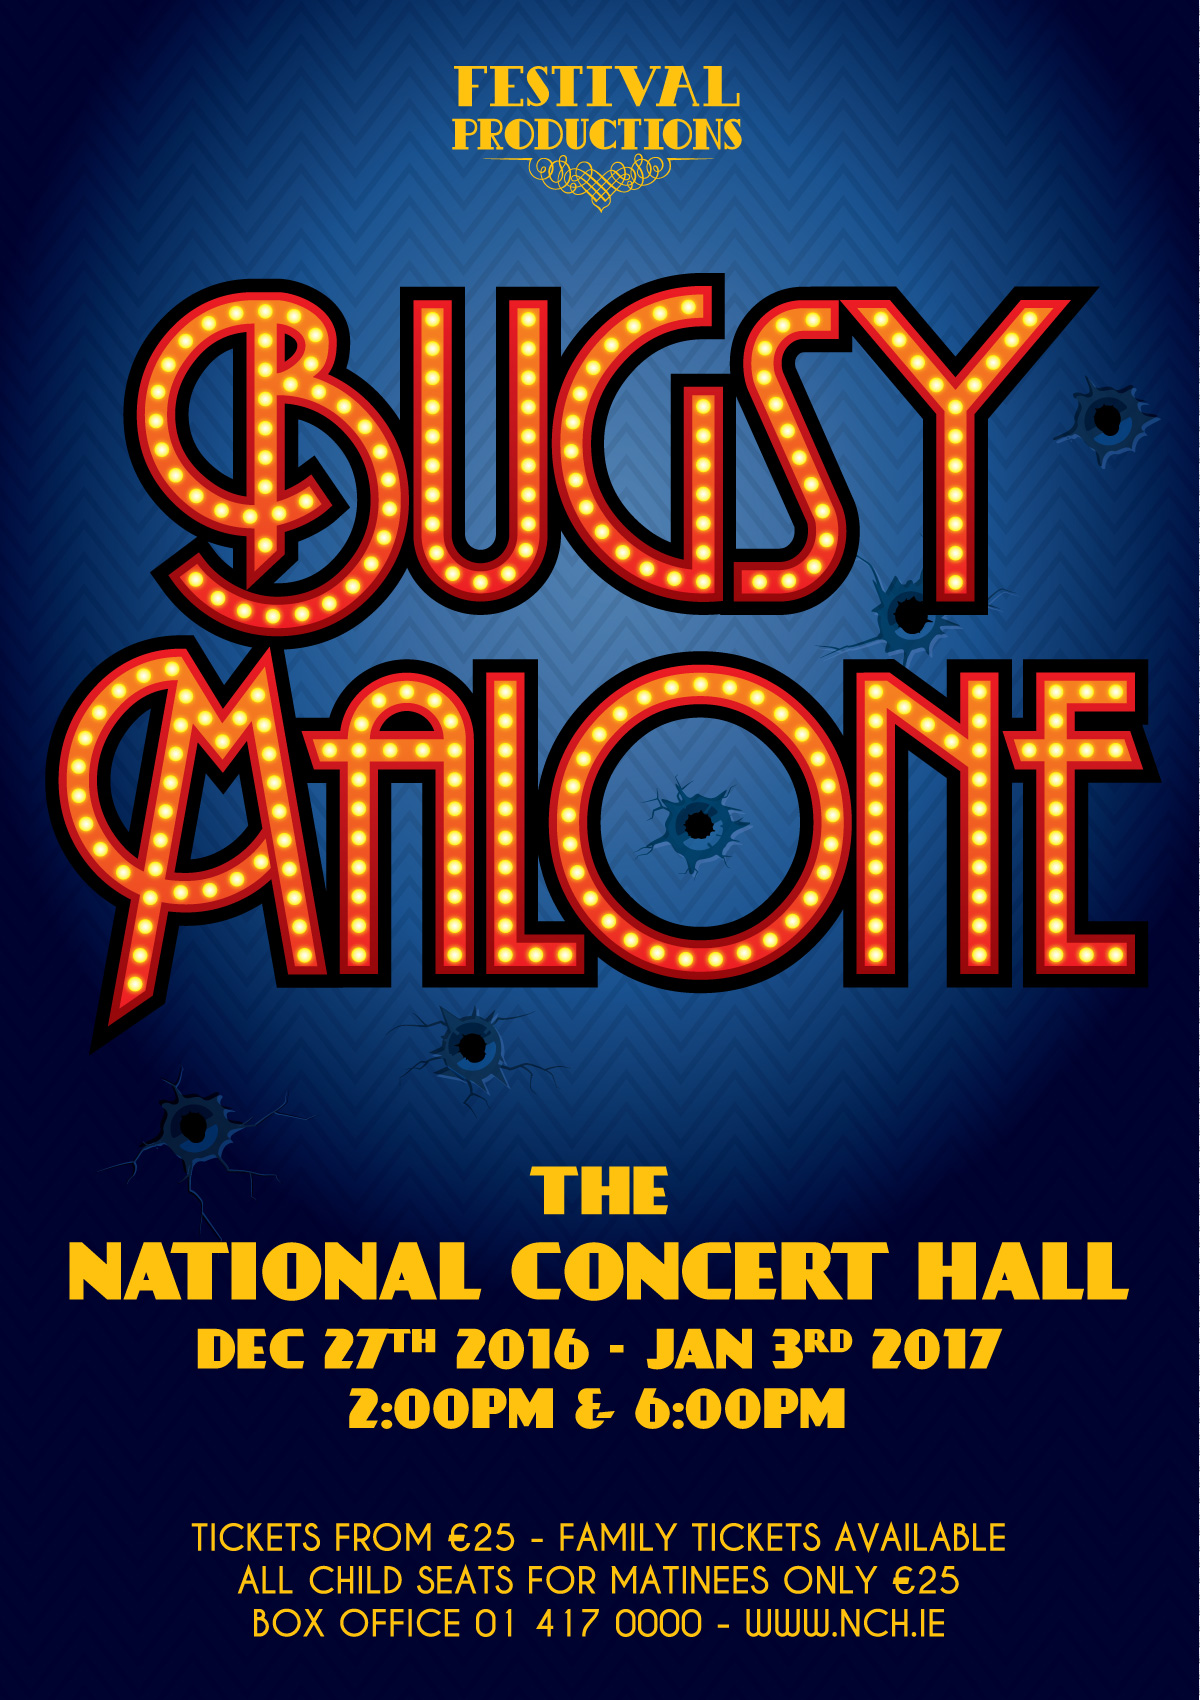 Bugsy Malone Logo & Graphics - Client: Festival Productions